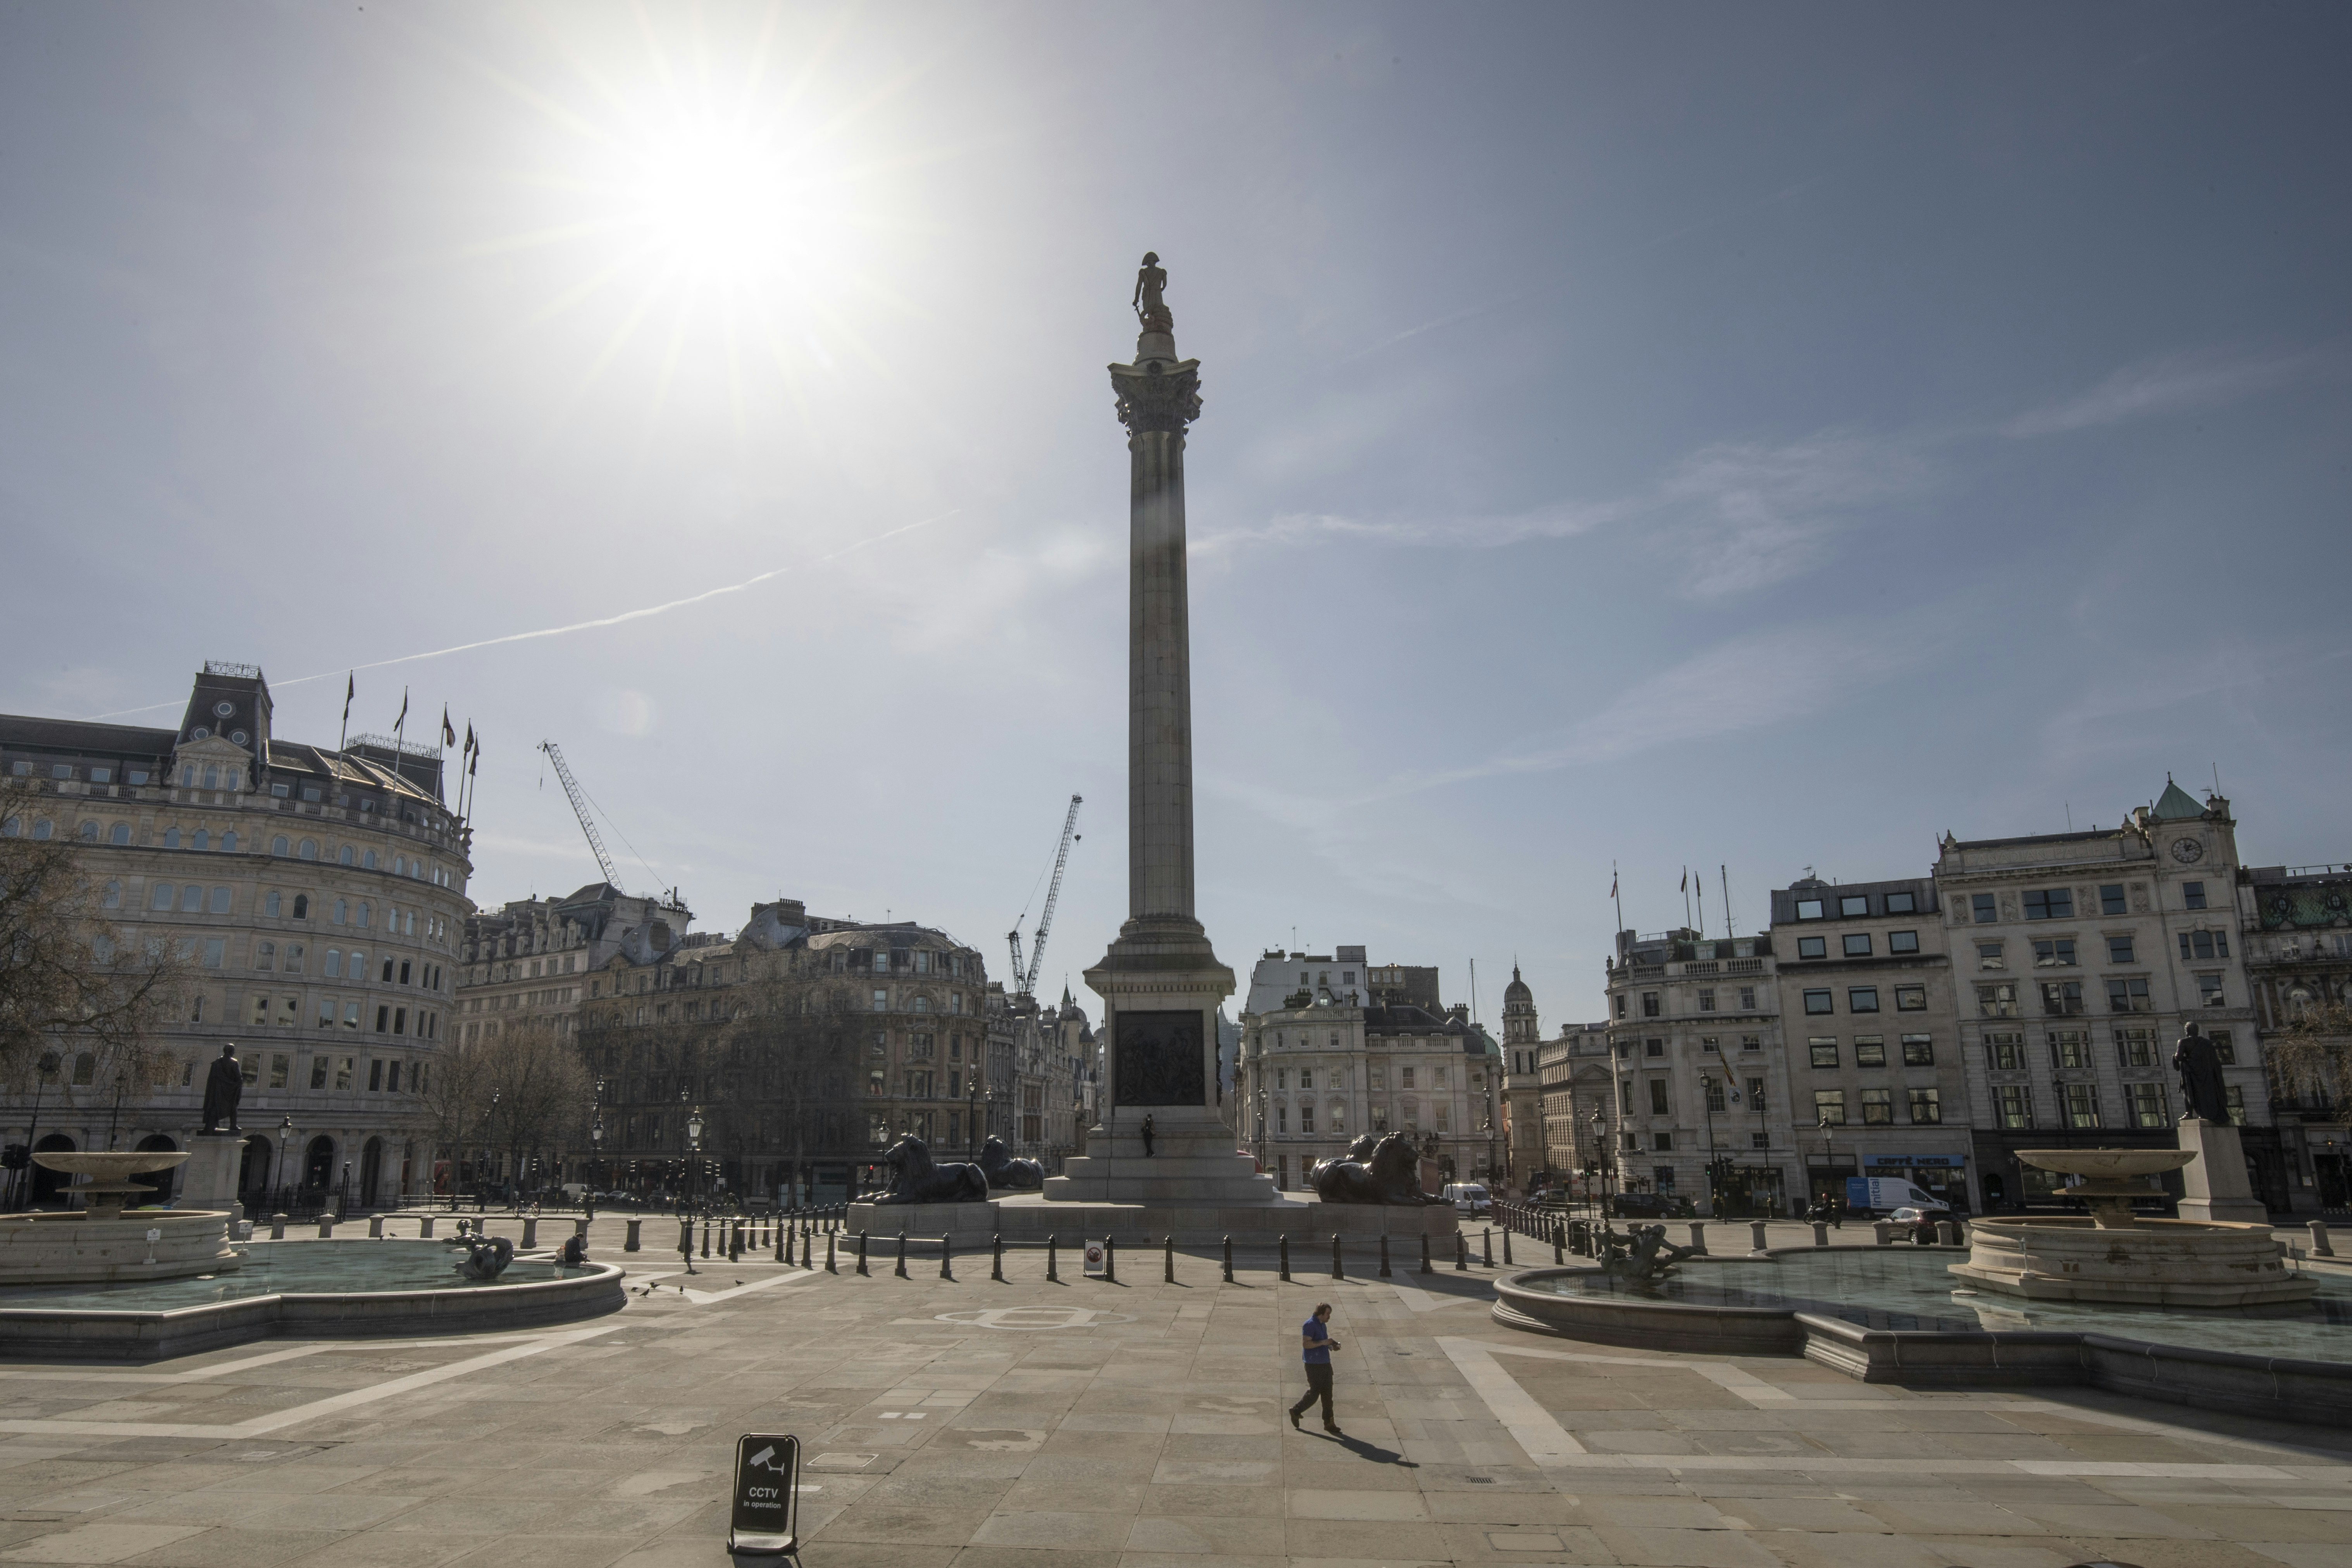 An all but empty Trafalgar Square on March 24, 2020 in London